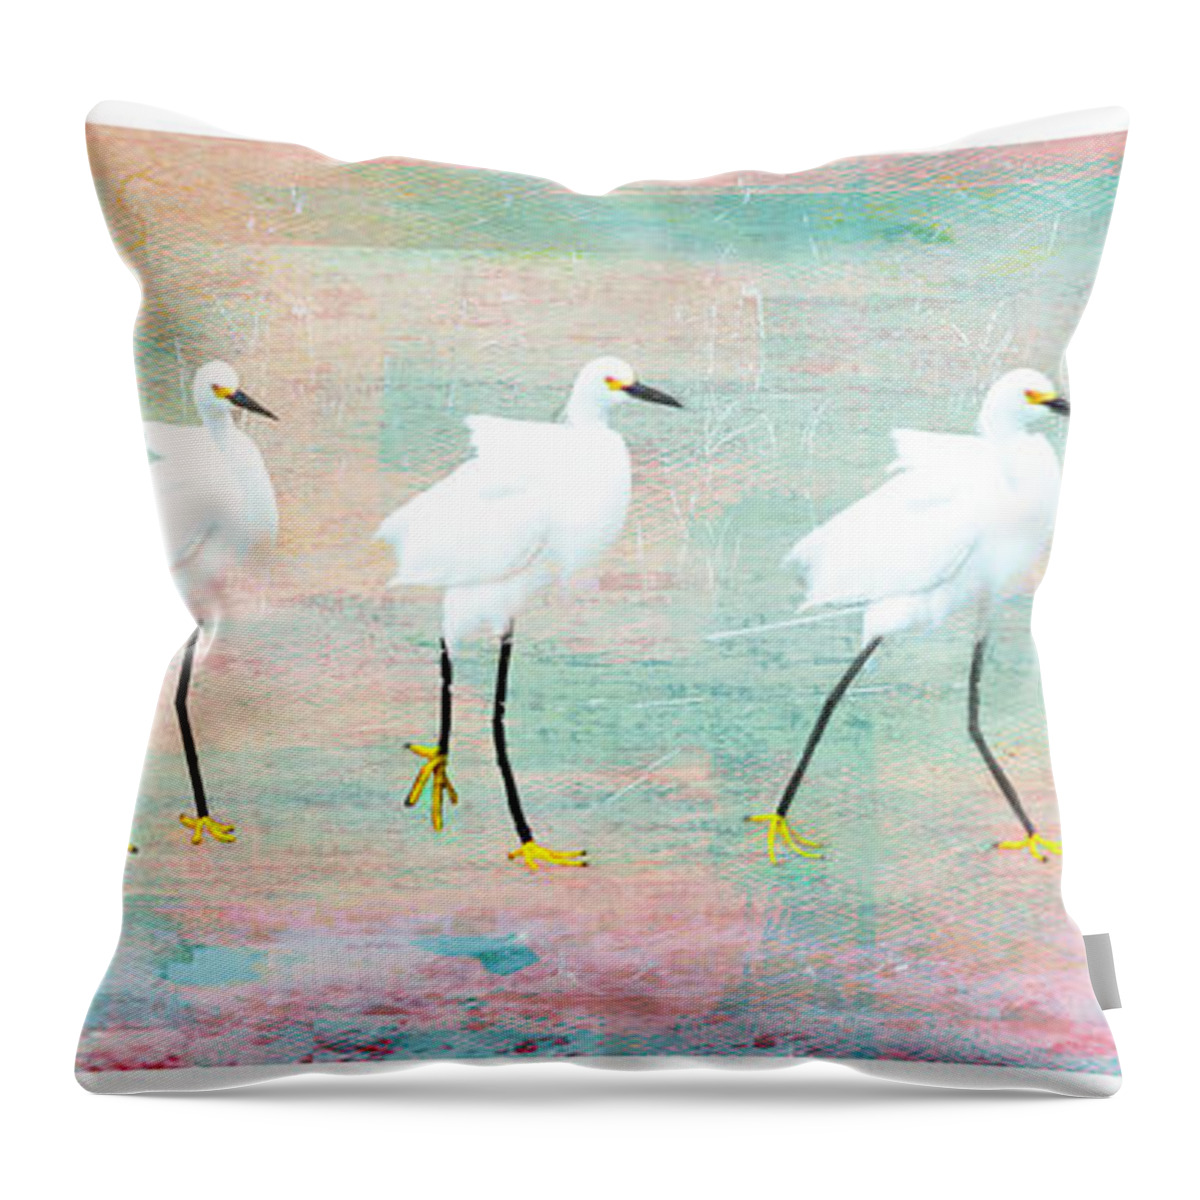 Egrets Throw Pillow featuring the digital art Party Egrets by Jennie Breeze